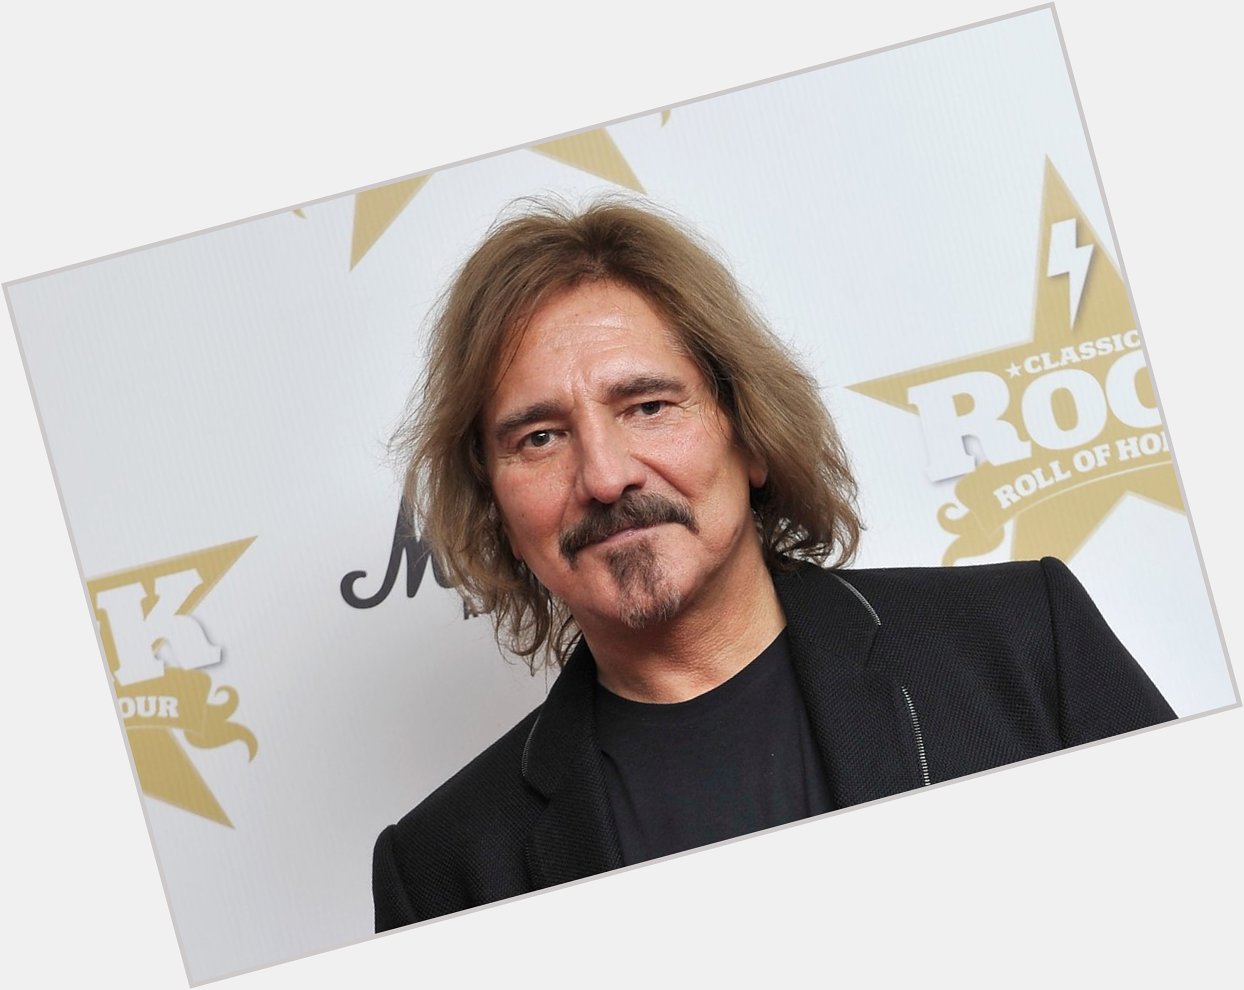 Happy birthday to Black Sabbath\s Geezer Butler who was born on this day in 1949.  